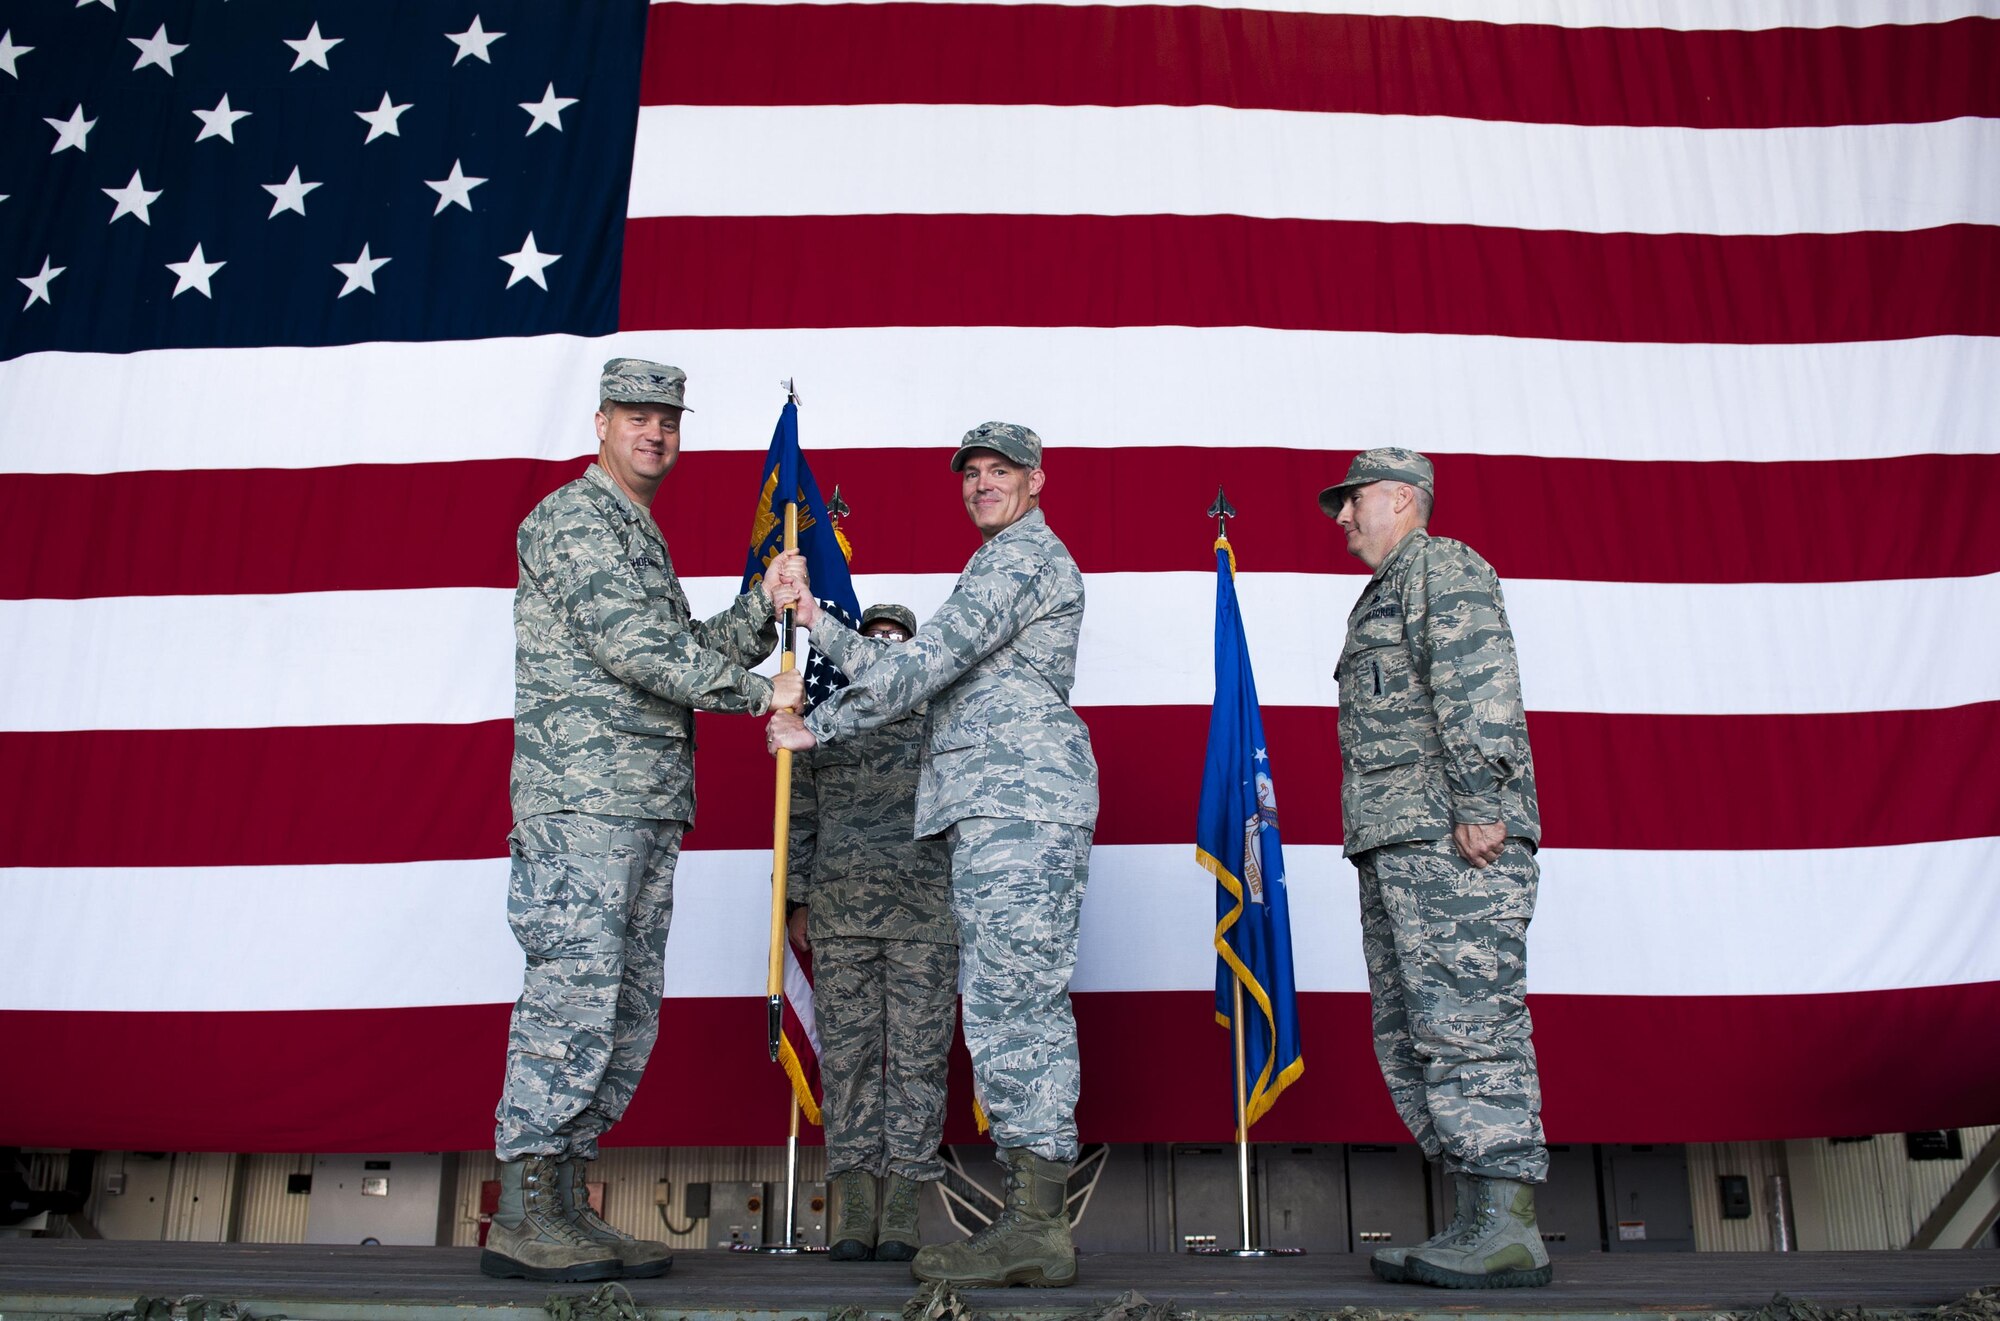 U.S. Air Force Col. George Sebren, 8th Maintenance Group commander, receives the guidon from Col. David Shoemaker, 8th Fighter Wing commander, during a change of command ceremony held June 28, 2017, at Kunsan Air Base, Republic of Korea. Shoemaker presided over the ceremony in which Col. James Long relinquished command of the 8th MXG to Sebren. (U.S. Air Force photo by Senior Airman Colville McFee/Released)